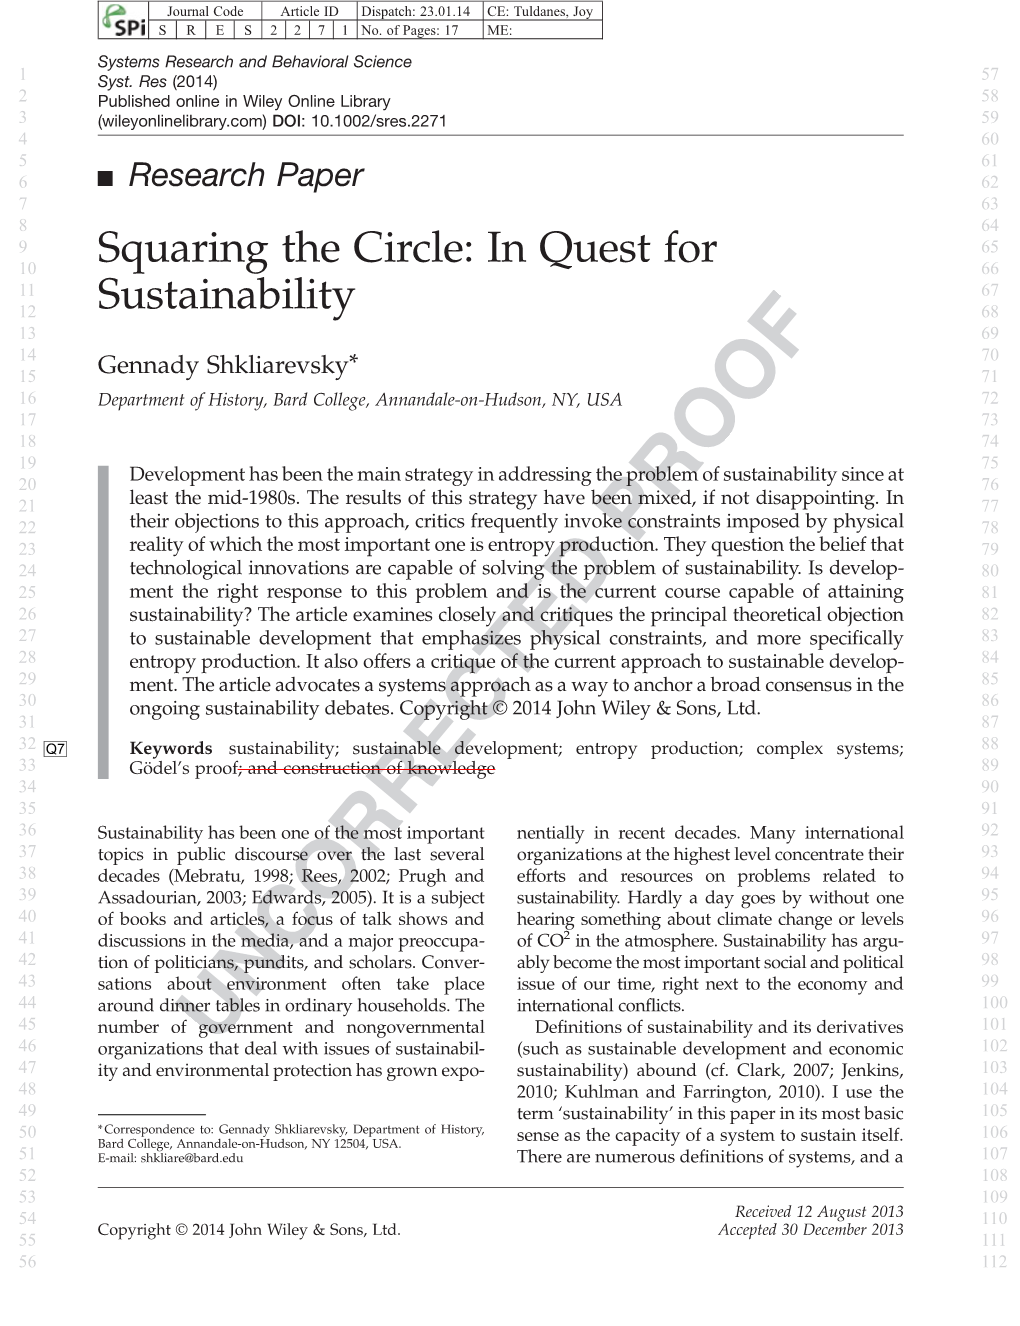 Squaring the Circle: in Quest for Sustainability